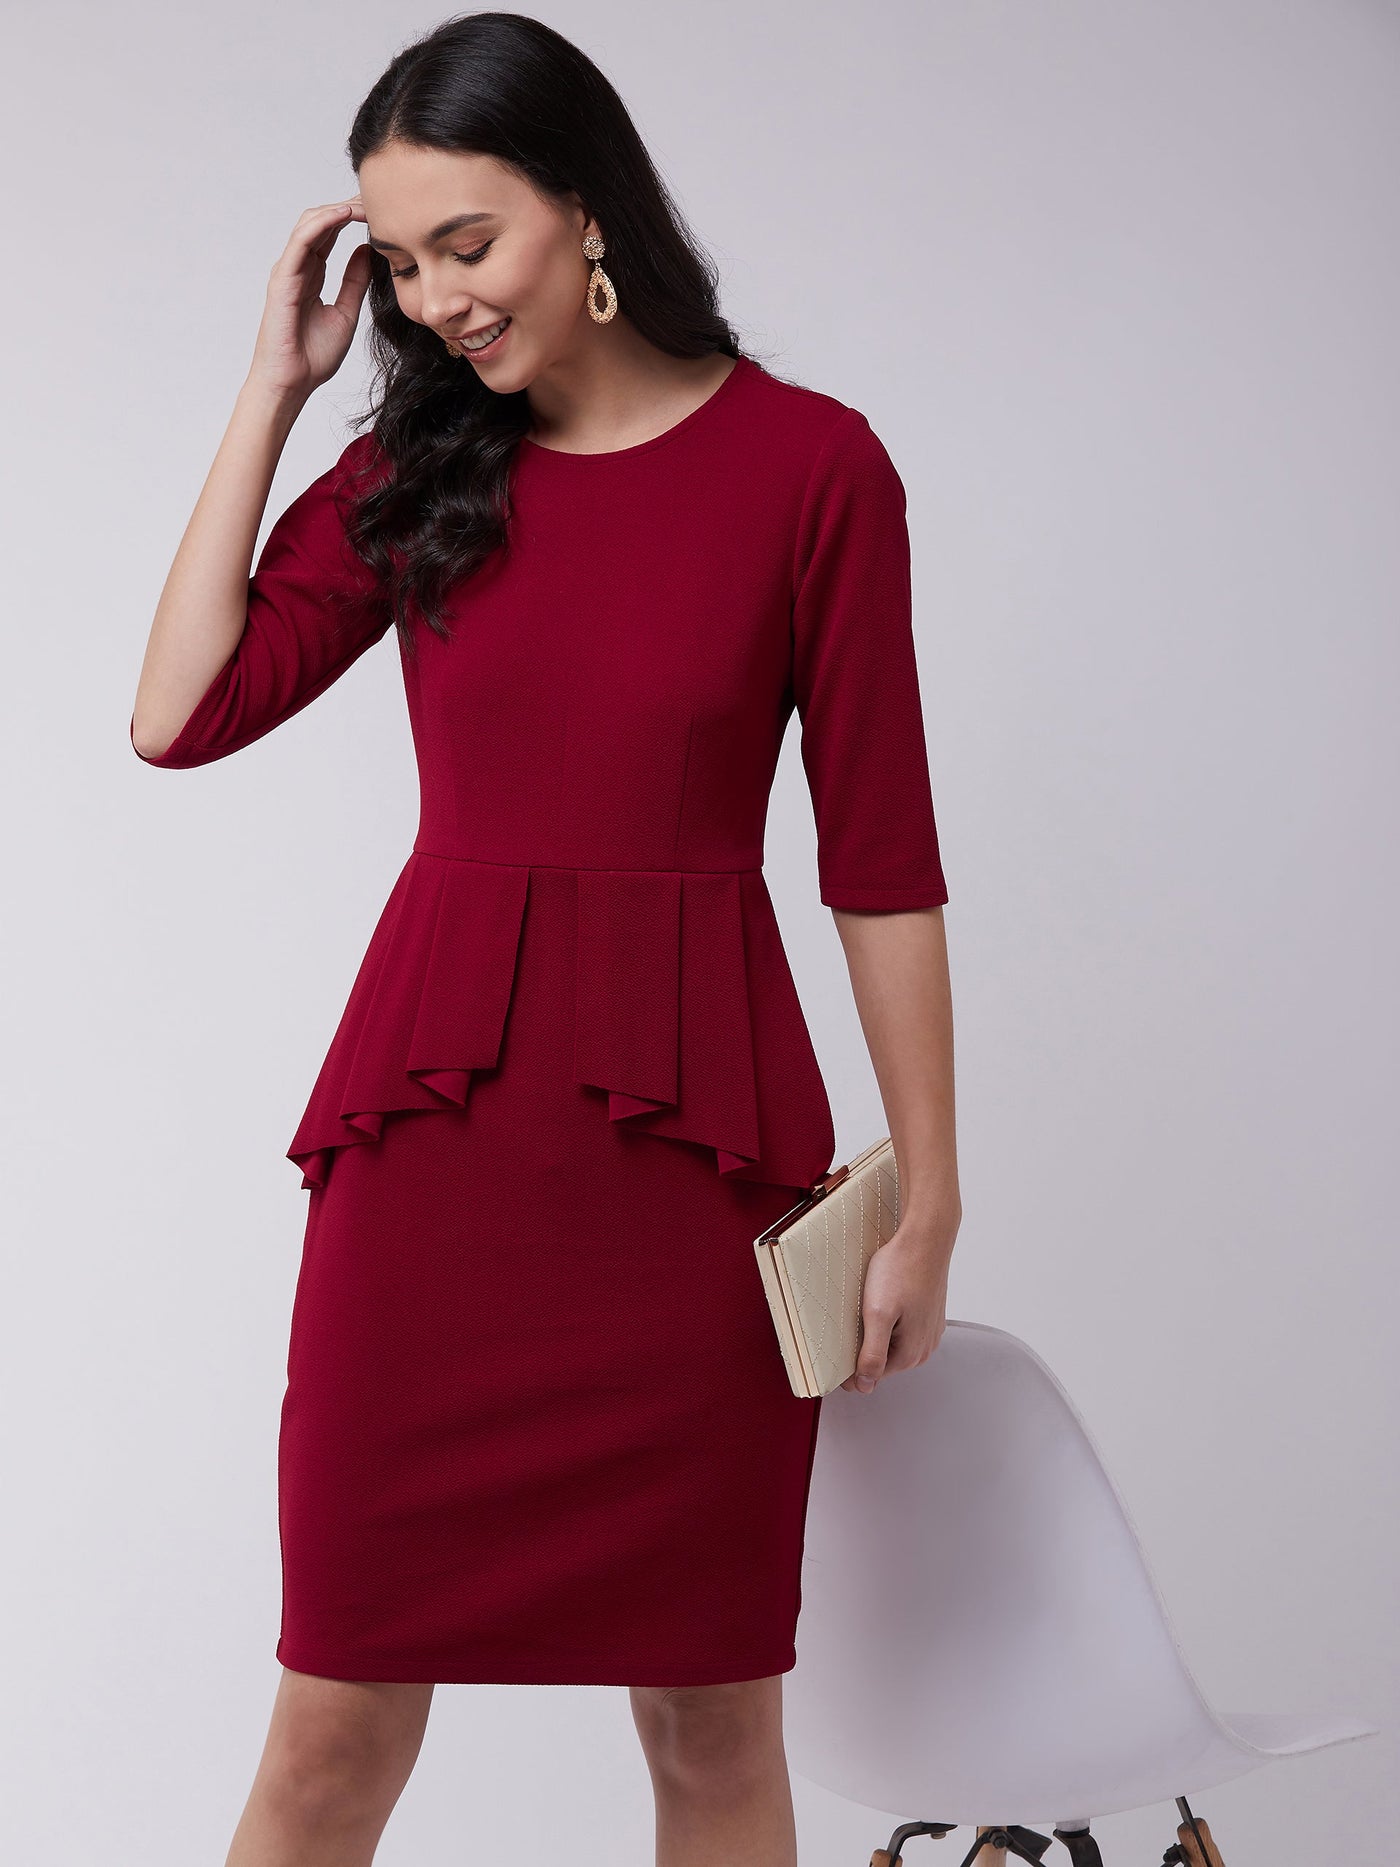 Solid Peplum Fitted Dress